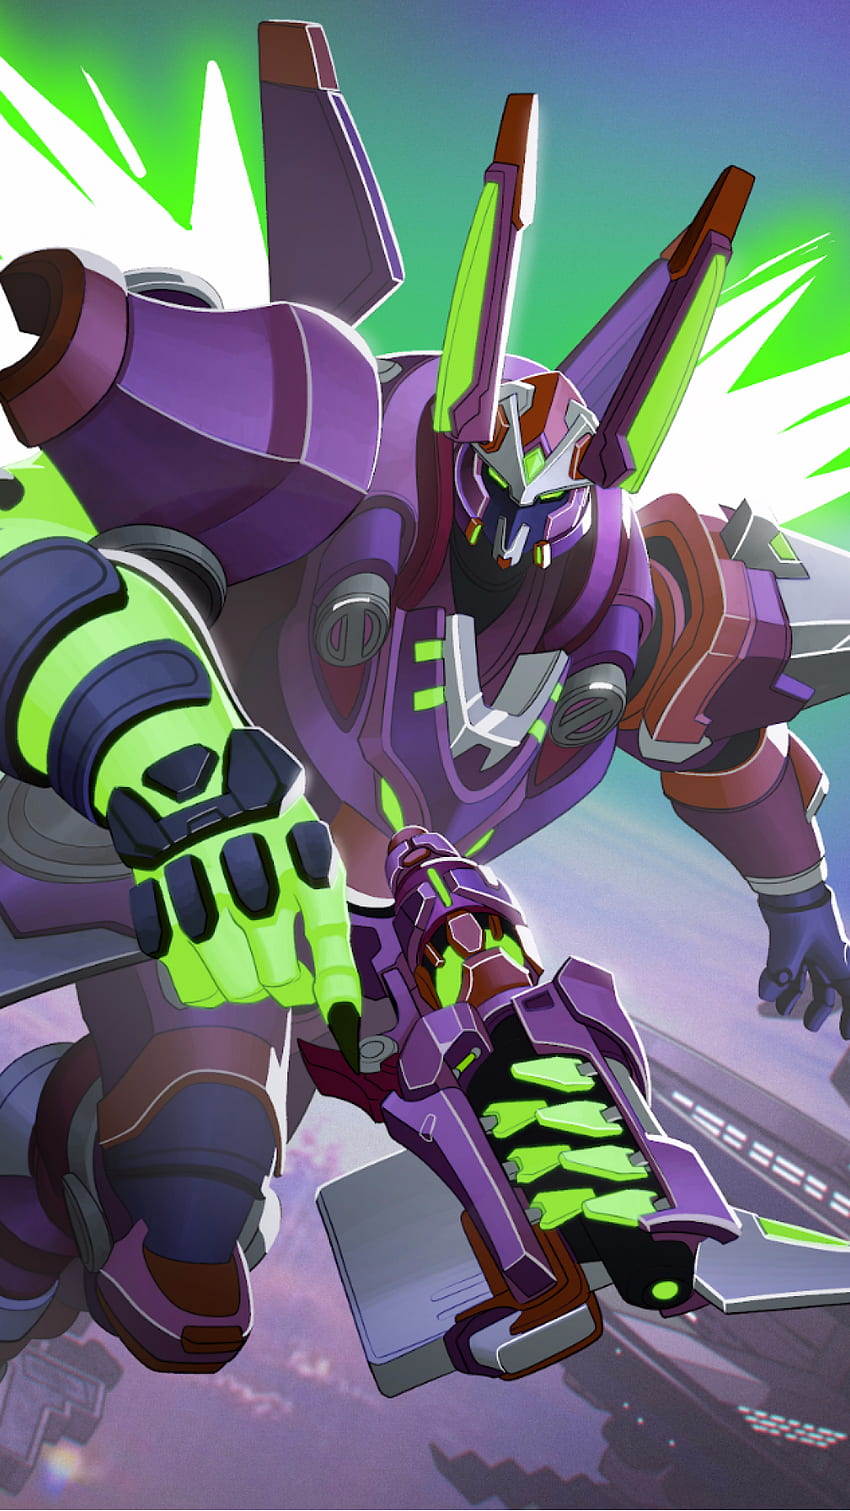 Paladins, Androxus, Battle Suit for iPhone 8, iPhone 7 Plus, iPhone 6+, Sony Xperia Z, HTC One HD phone wallpaper